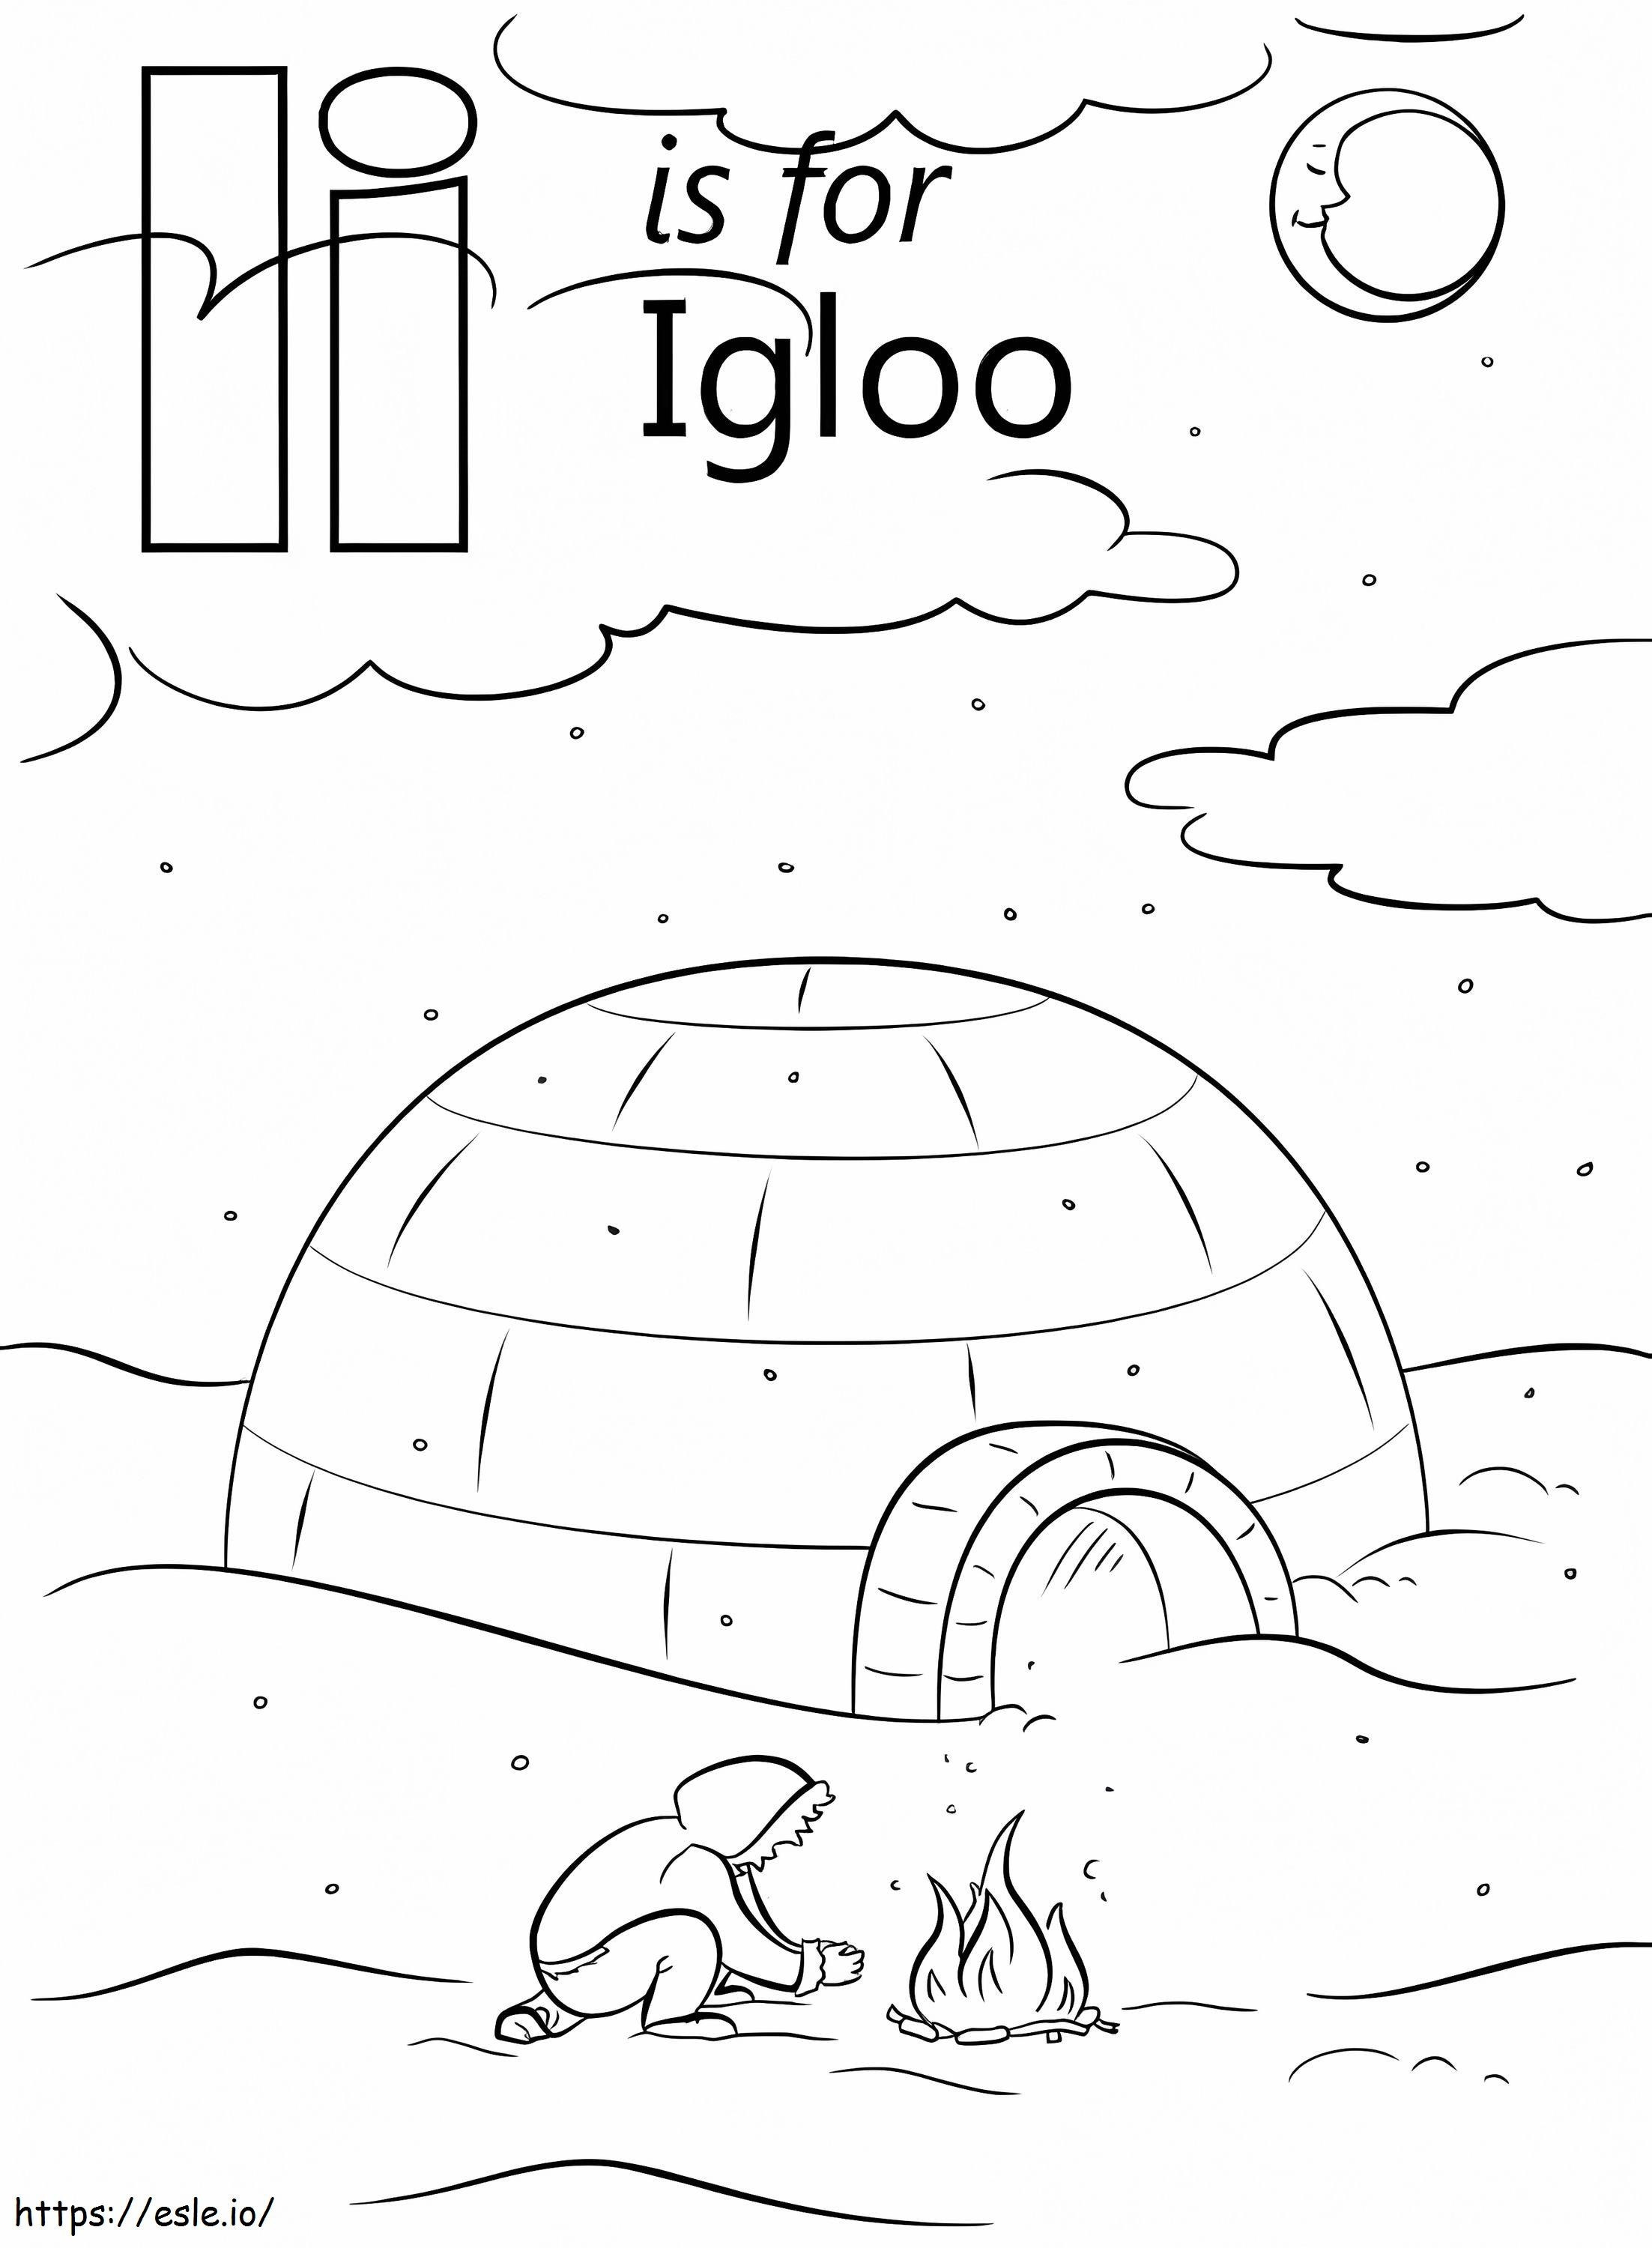 Igloo Letra I coloring page